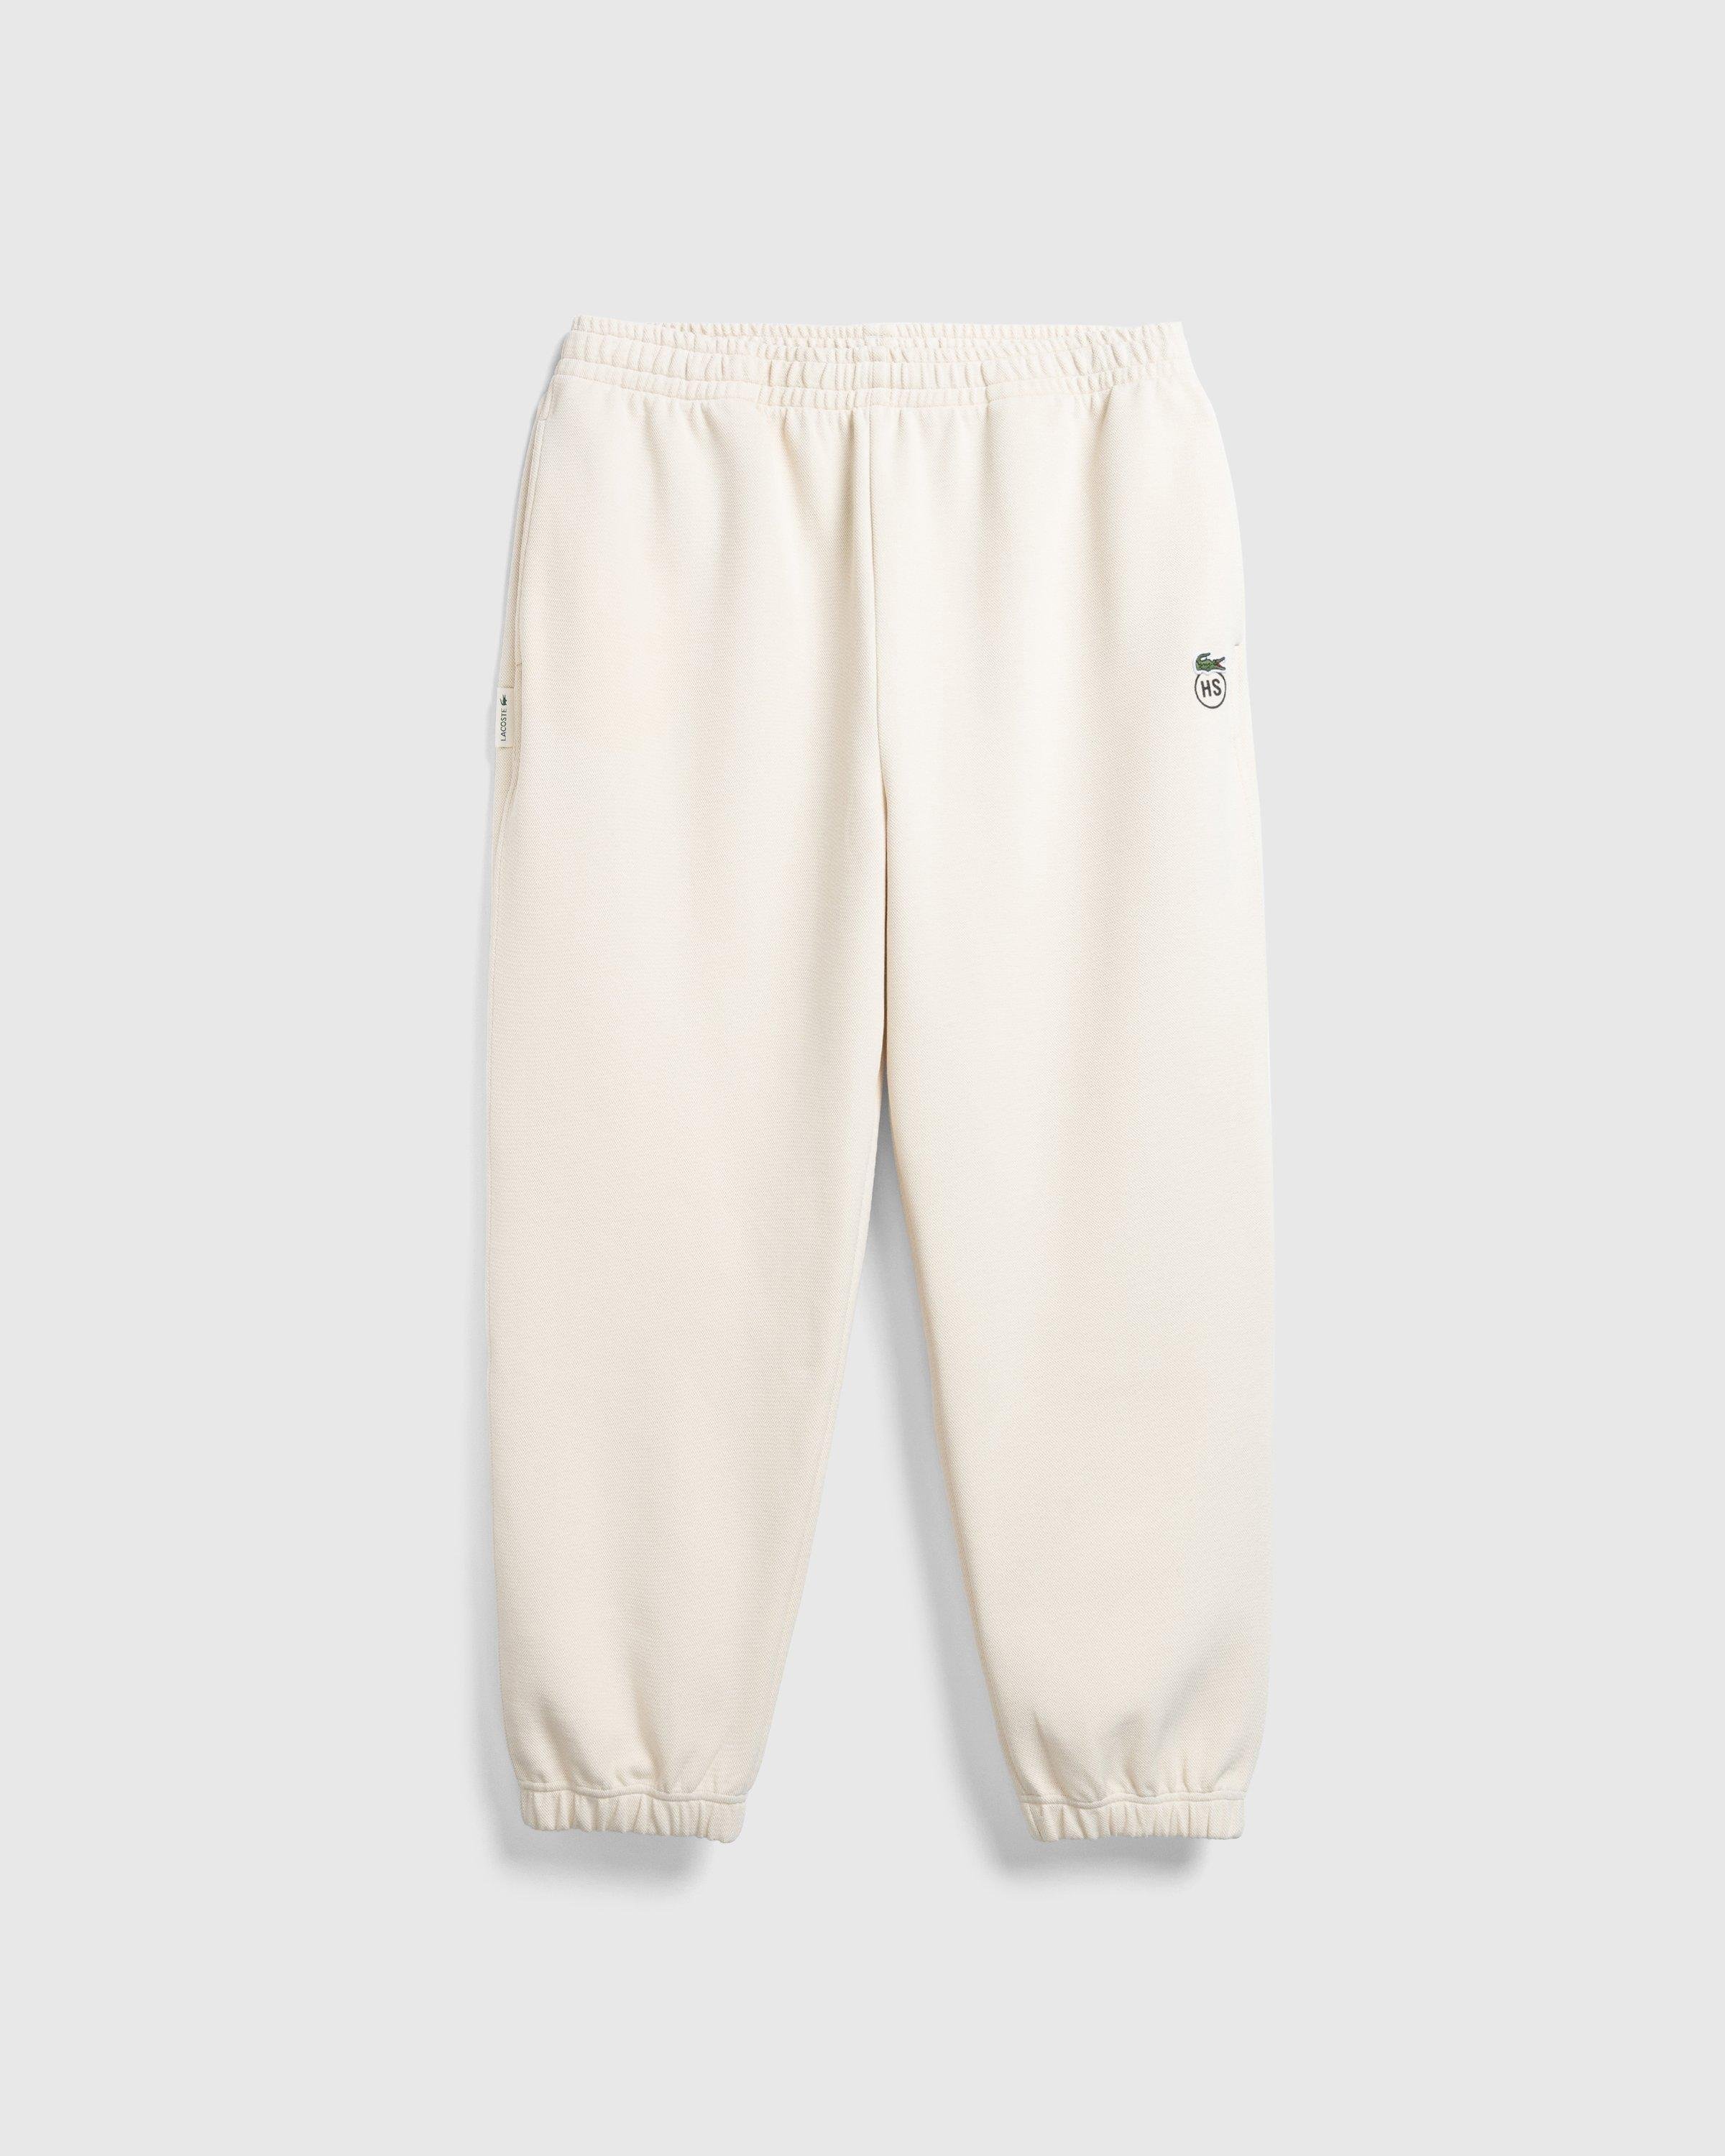 Lacoste x HighsnobietyDouble-Faced Piqué Sweatpants Eggshell by HIGHSNOBIETY